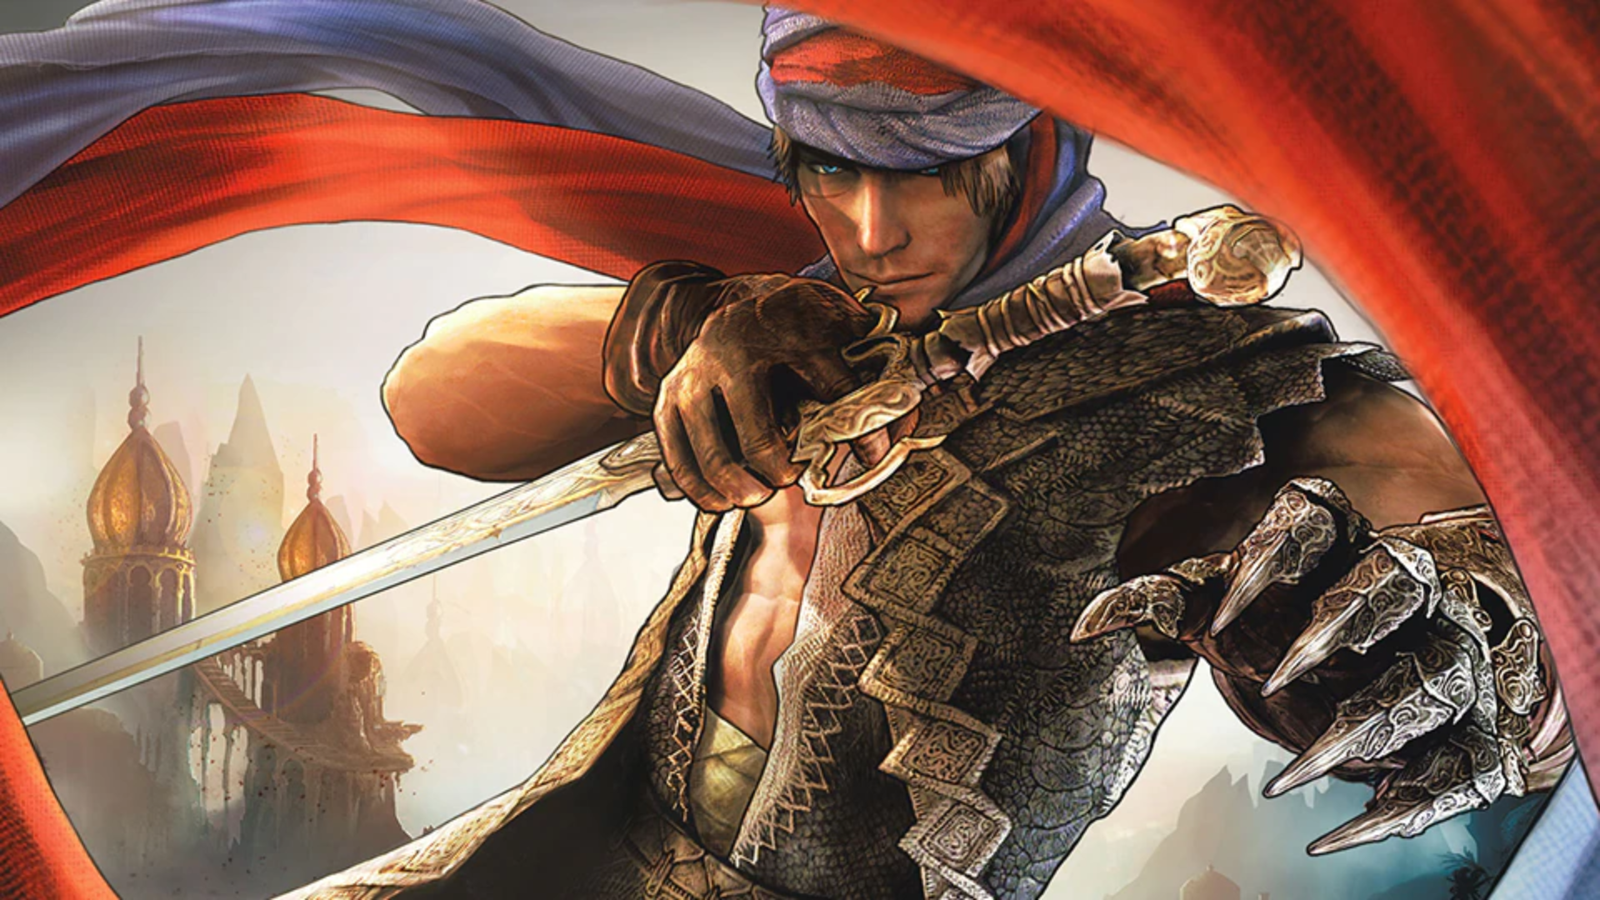 ubisoft prince of persia remake sands of time the masked protagonist stares while posing with a sword